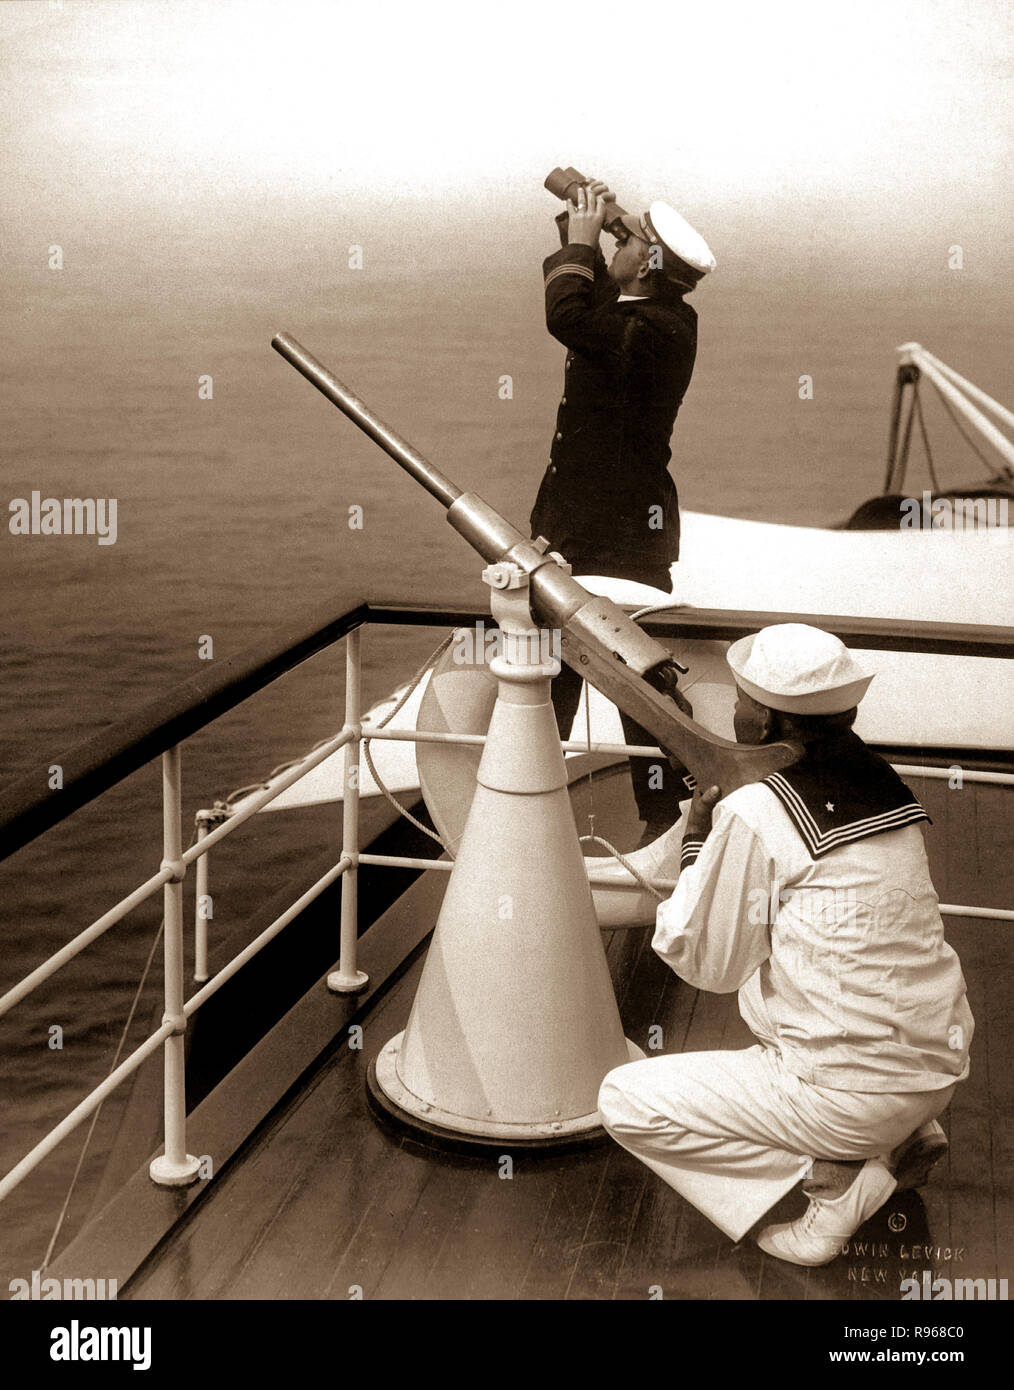 Anti-aircraft gun practice.  Photo taken on one of the converted yachts now being used in the Naval Reserve.  Ca.  1918.    This archival print is available in the following sizes:    8' x 10'   $15.95 w/ FREE SHIPPING  11' x 14' $23.95 w/ FREE SHIPPING  16' x 20' $59.95 w/ FREE SHIPPING  20' x 24' $99.95 w/ FREE SHIPPING    * The American Photoarchive watermark will not appear on your print. Stock Photo